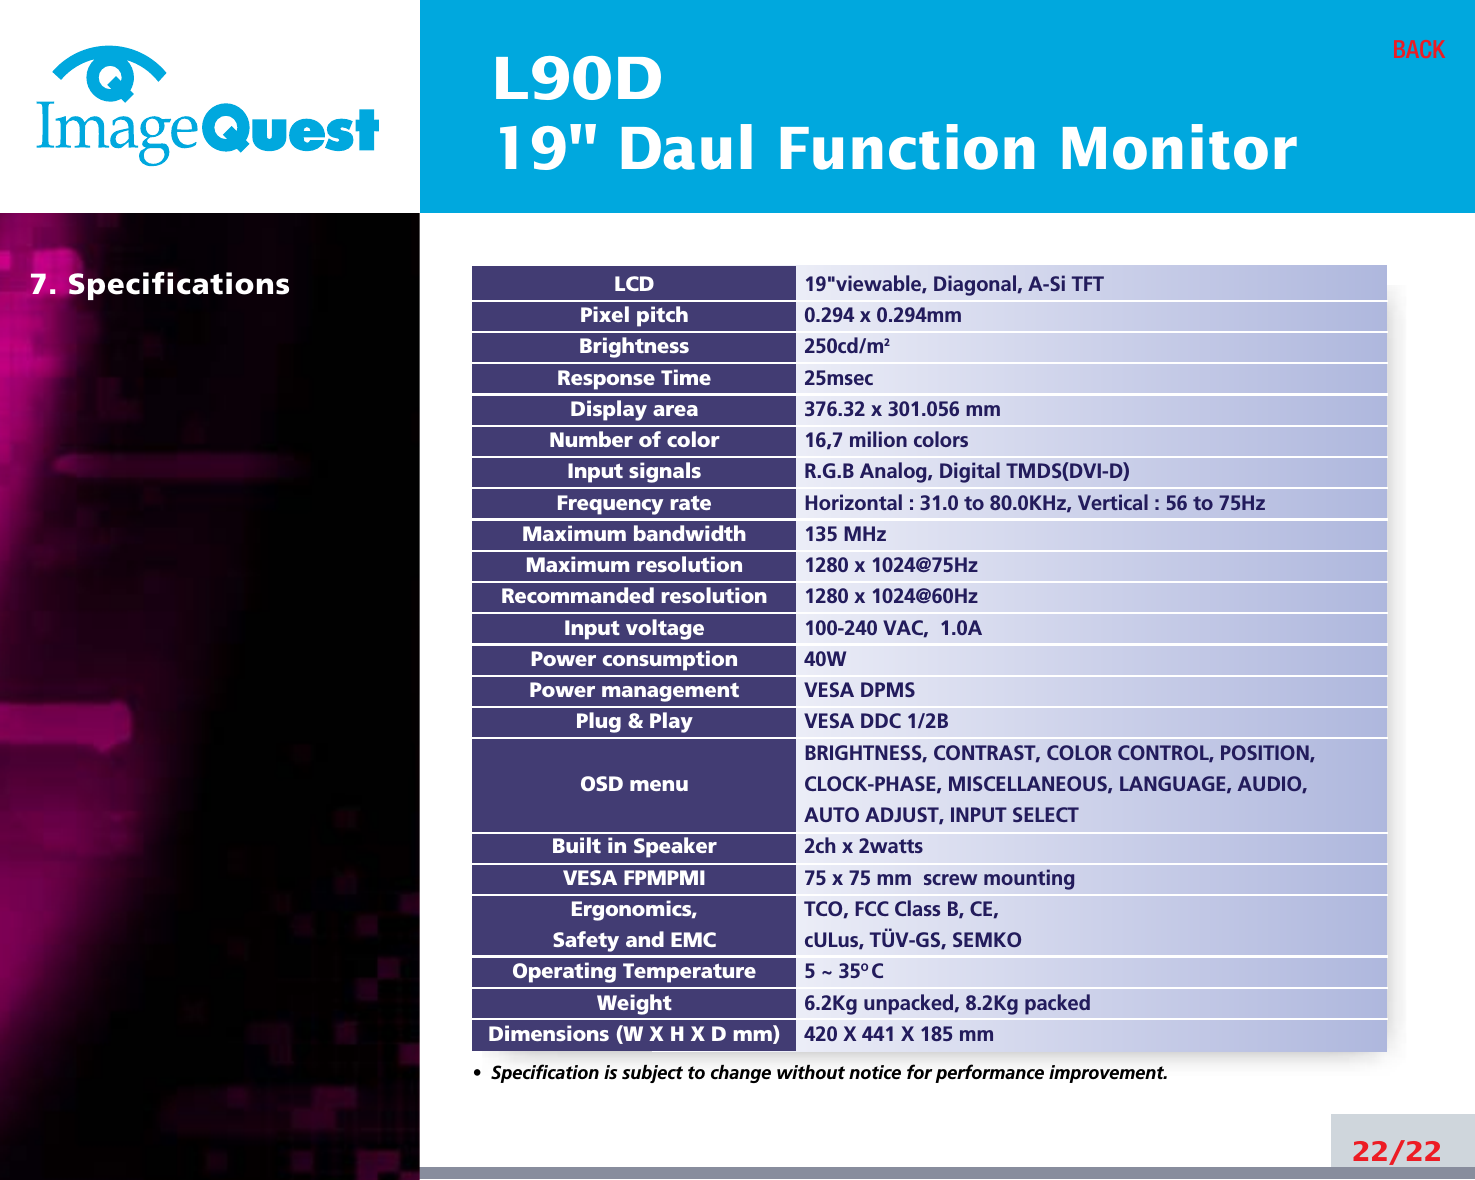 L90D19&quot; Daul Function Monitor22/22BACK19&quot;viewable, Diagonal, A-Si TFT0.294 x 0.294mm250cd/m225msec376.32 x 301.056 mm16,7 milion colorsR.G.B Analog, Digital TMDS(DVI-D)Horizontal : 31.0 to 80.0KHz, Vertical : 56 to 75Hz135 MHz1280 x 1024@75Hz 1280 x 1024@60Hz100-240 VAC,  1.0A40WVESA DPMSVESA DDC 1/2BBRIGHTNESS, CONTRAST, COLOR CONTROL, POSITION, CLOCK-PHASE, MISCELLANEOUS, LANGUAGE, AUDIO,AUTO ADJUST, INPUT SELECT2ch x 2watts75 x 75 mm  screw mountingTCO, FCC Class B, CE, cULus, TÜV-GS, SEMKO5 ~ 35O C6.2Kg unpacked, 8.2Kg packed420 X 441 X 185 mmLCDPixel pitchBrightnessResponse TimeDisplay areaNumber of colorInput signalsFrequency rateMaximum bandwidthMaximum resolutionRecommanded resolutionInput voltagePower consumptionPower managementPlug &amp; PlayOSD menuBuilt in SpeakerVESA FPMPMIErgonomics,Safety and EMCOperating TemperatureWeightDimensions (W X H X D mm)•  Specification is subject to change without notice for performance improvement.7. Specifications